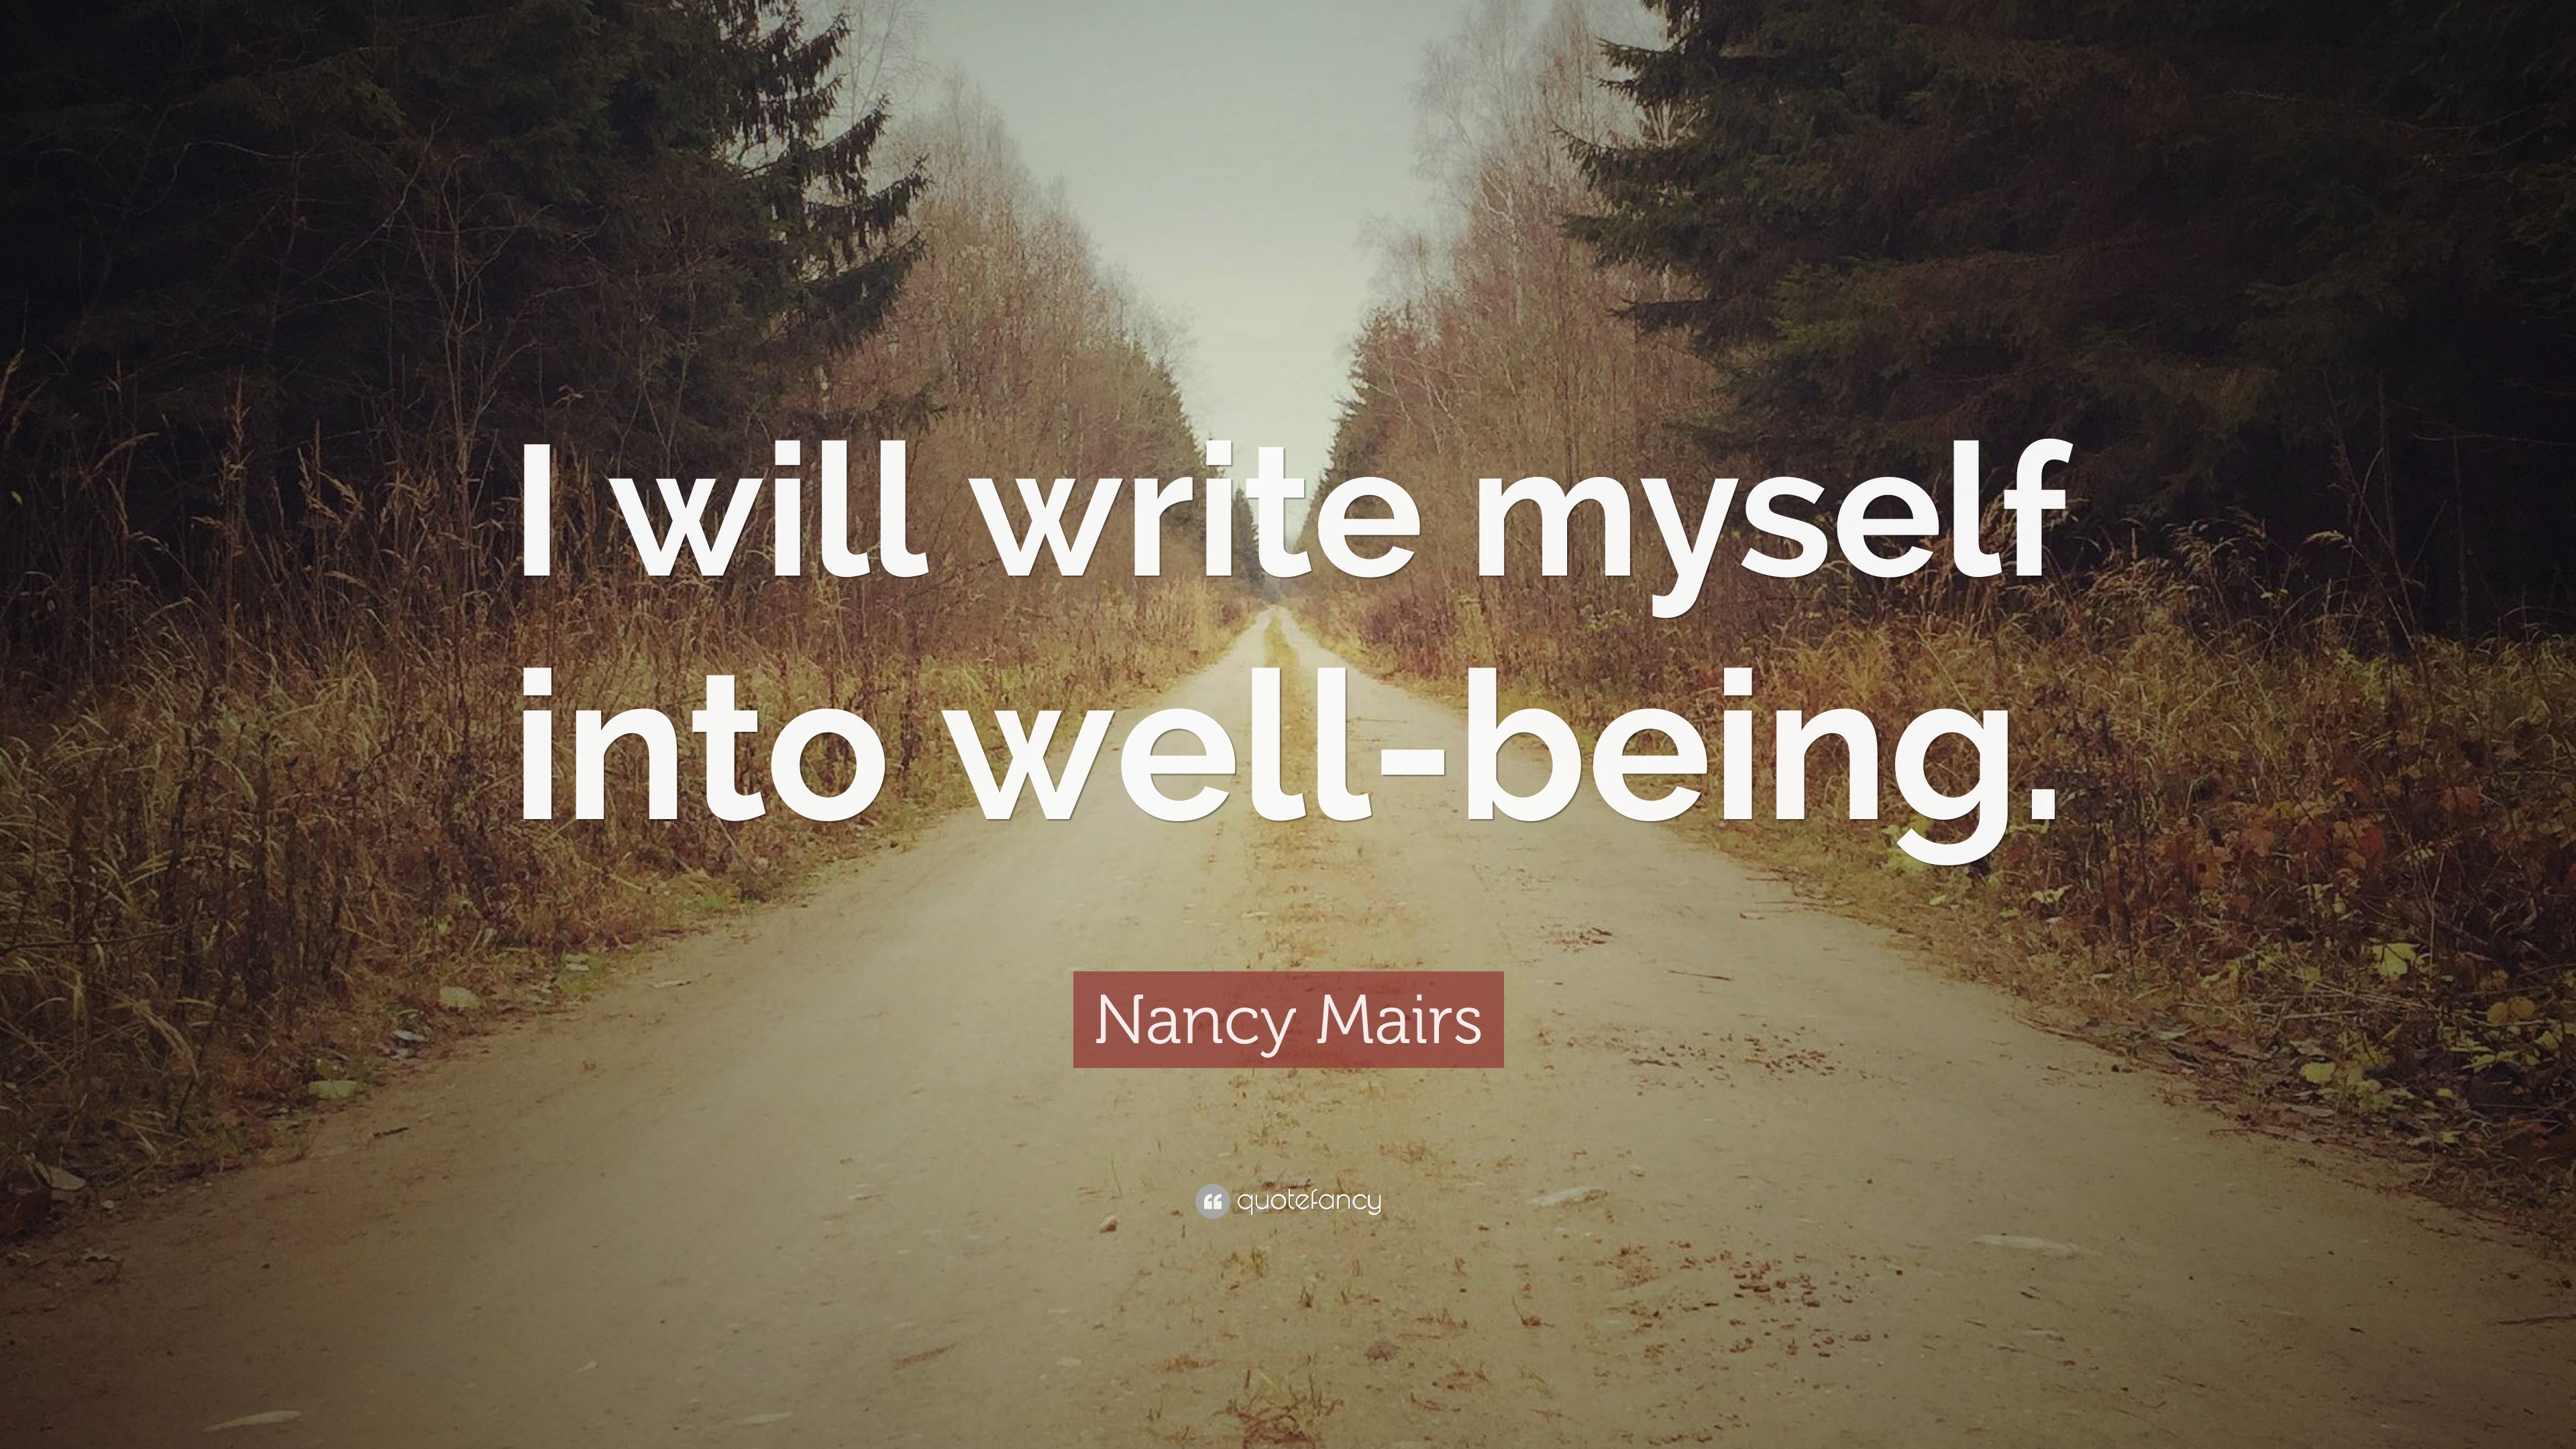 Nancy Mairs Quote: “I will write myself into well-being.”